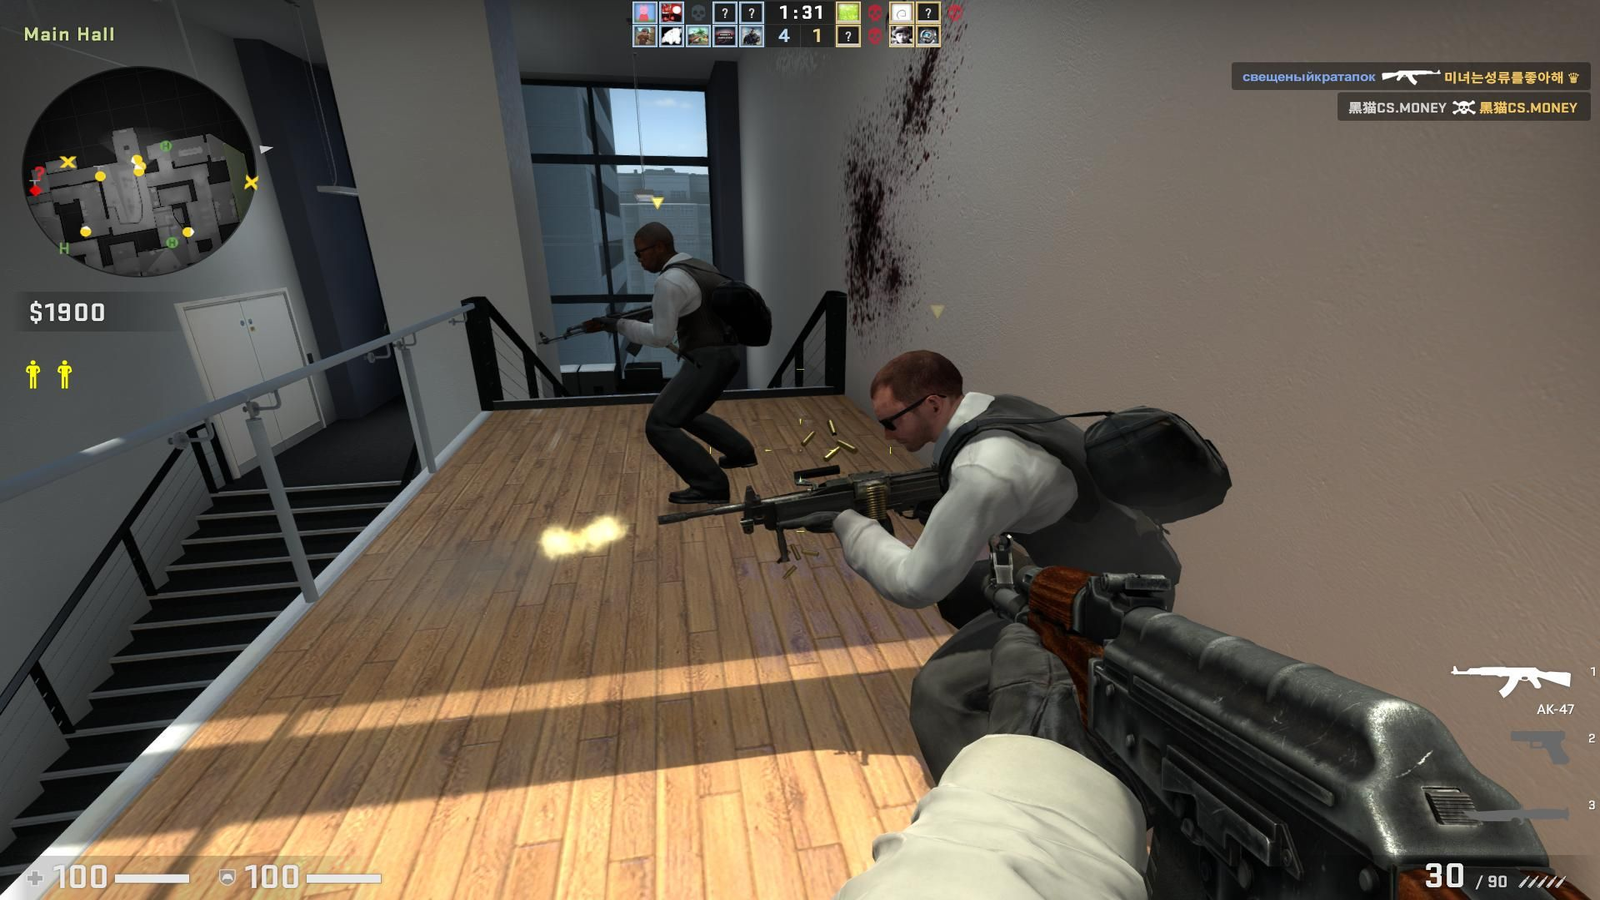 Has Counter-Strike: Global Offensive been improved by its updates